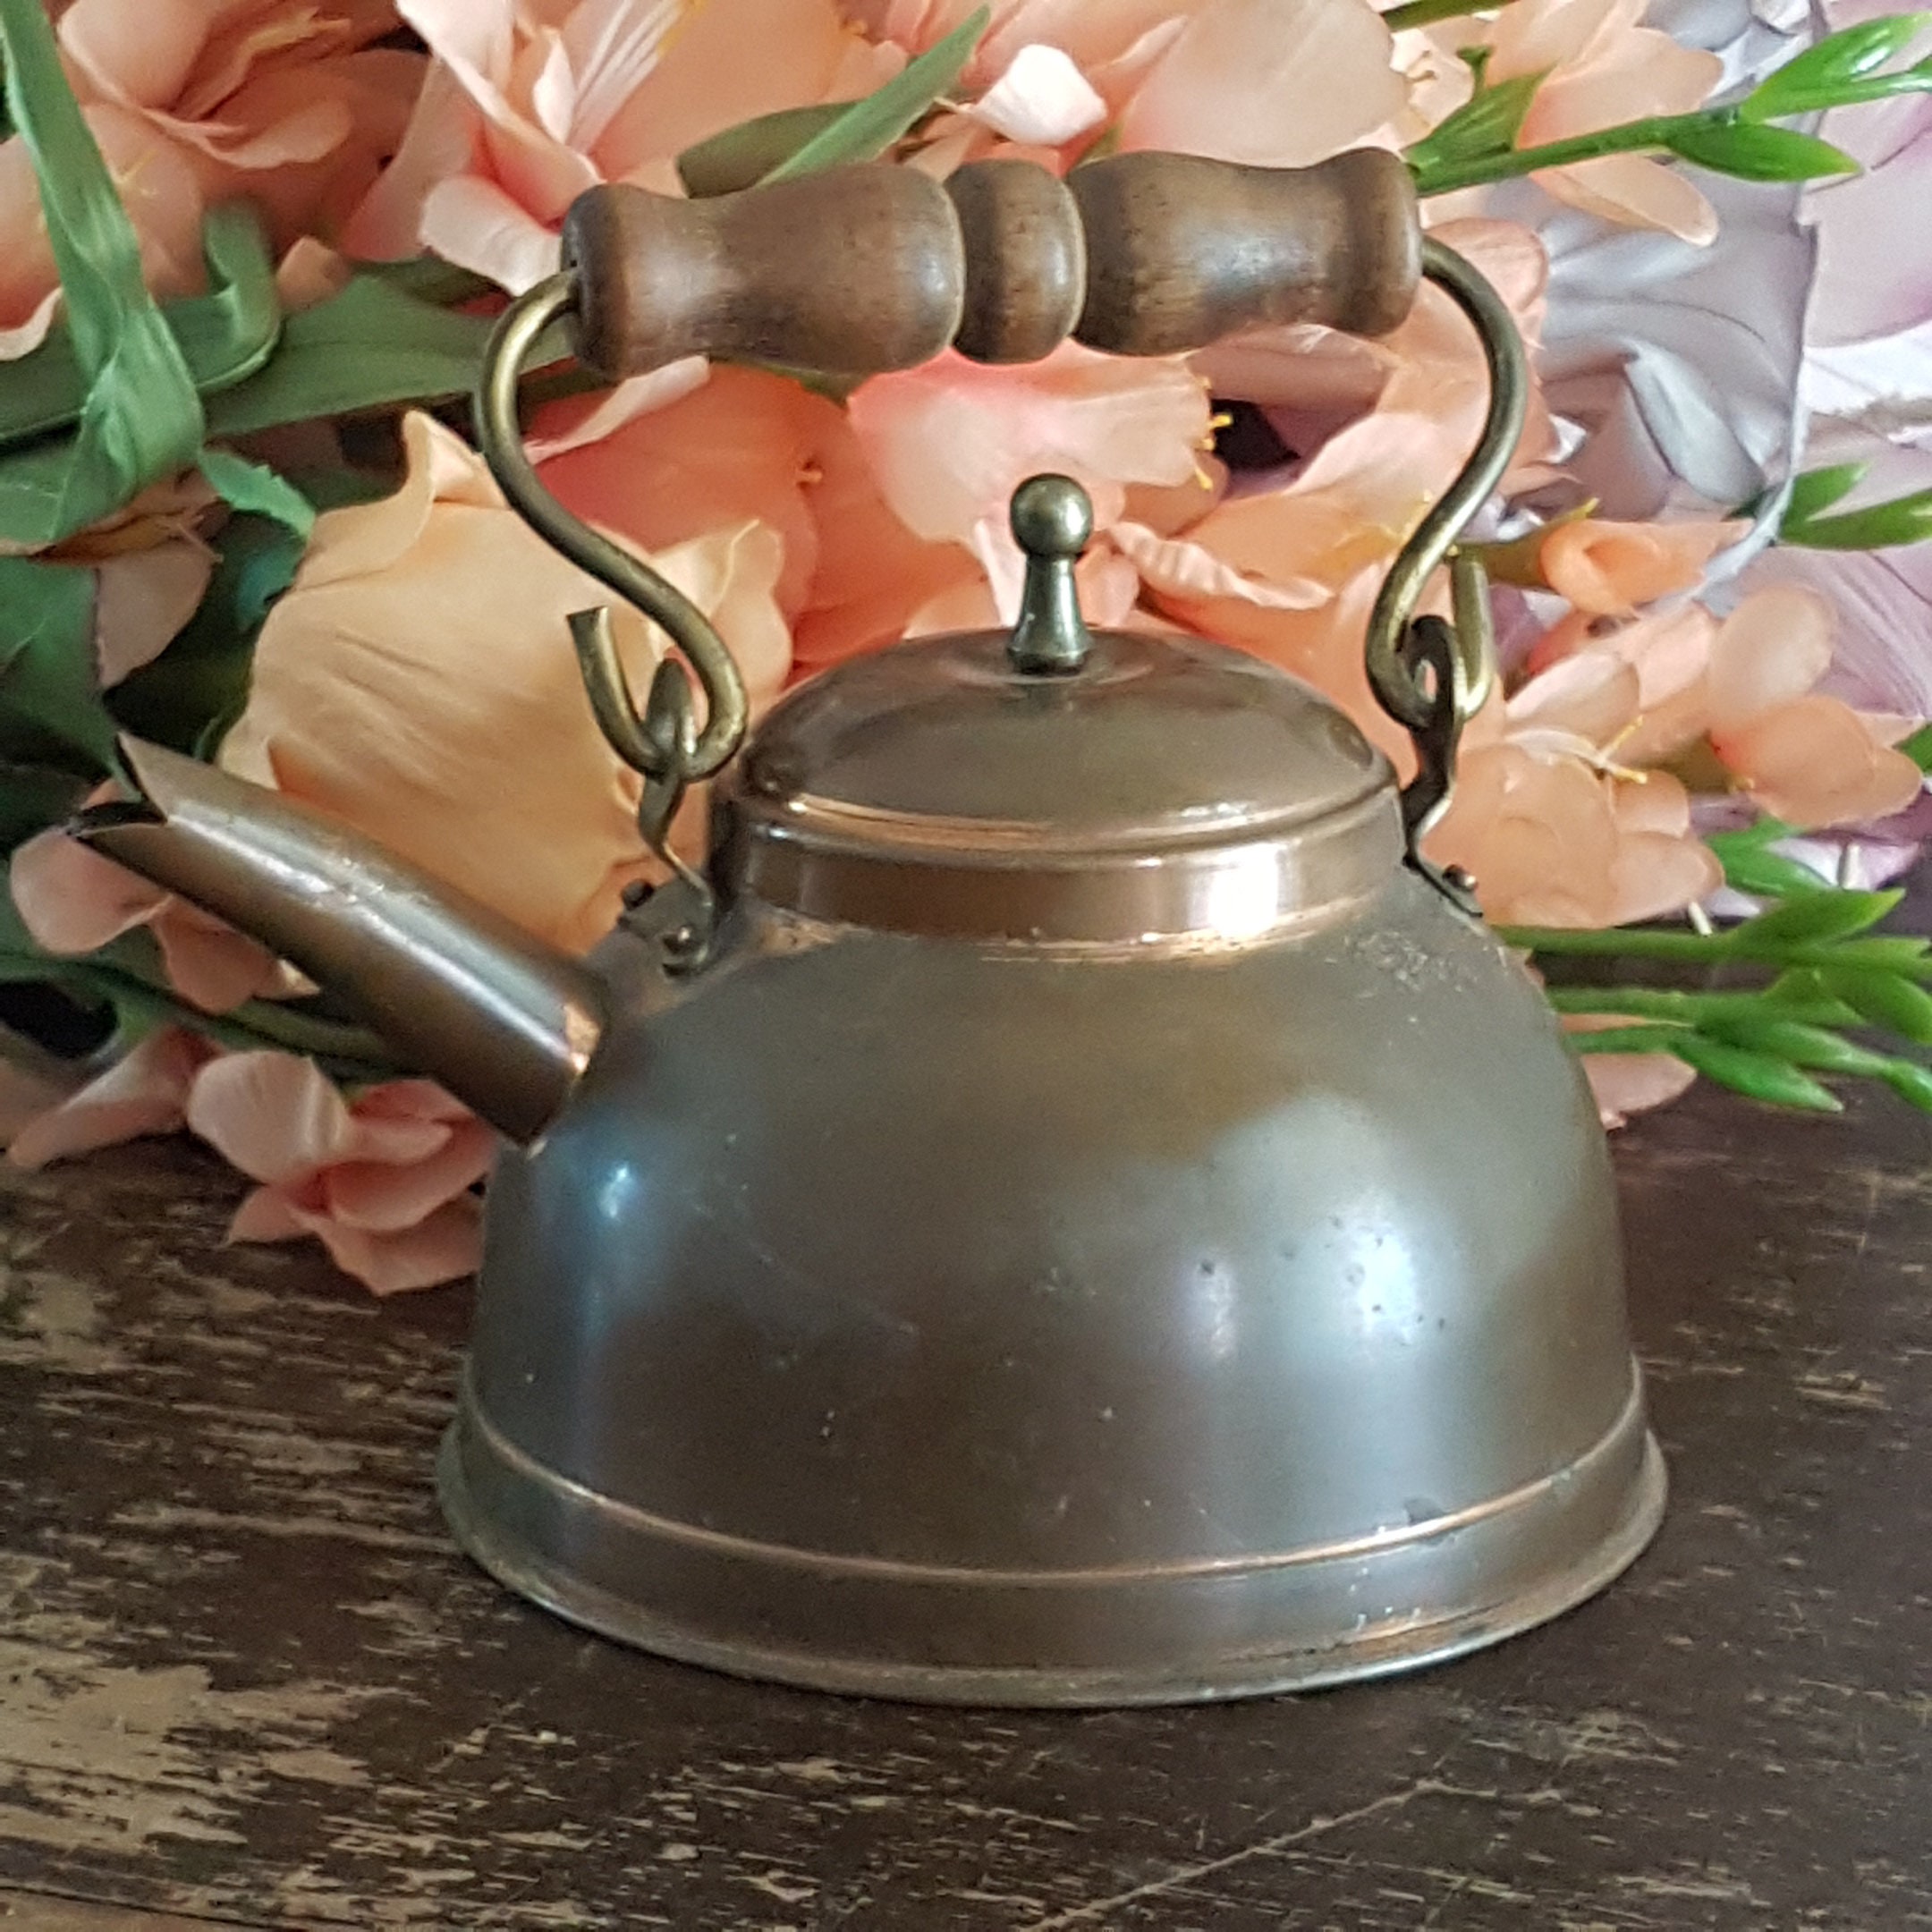 Vintage Copper Tea Kettle, Stovetop, Made in England, Brown Wooden